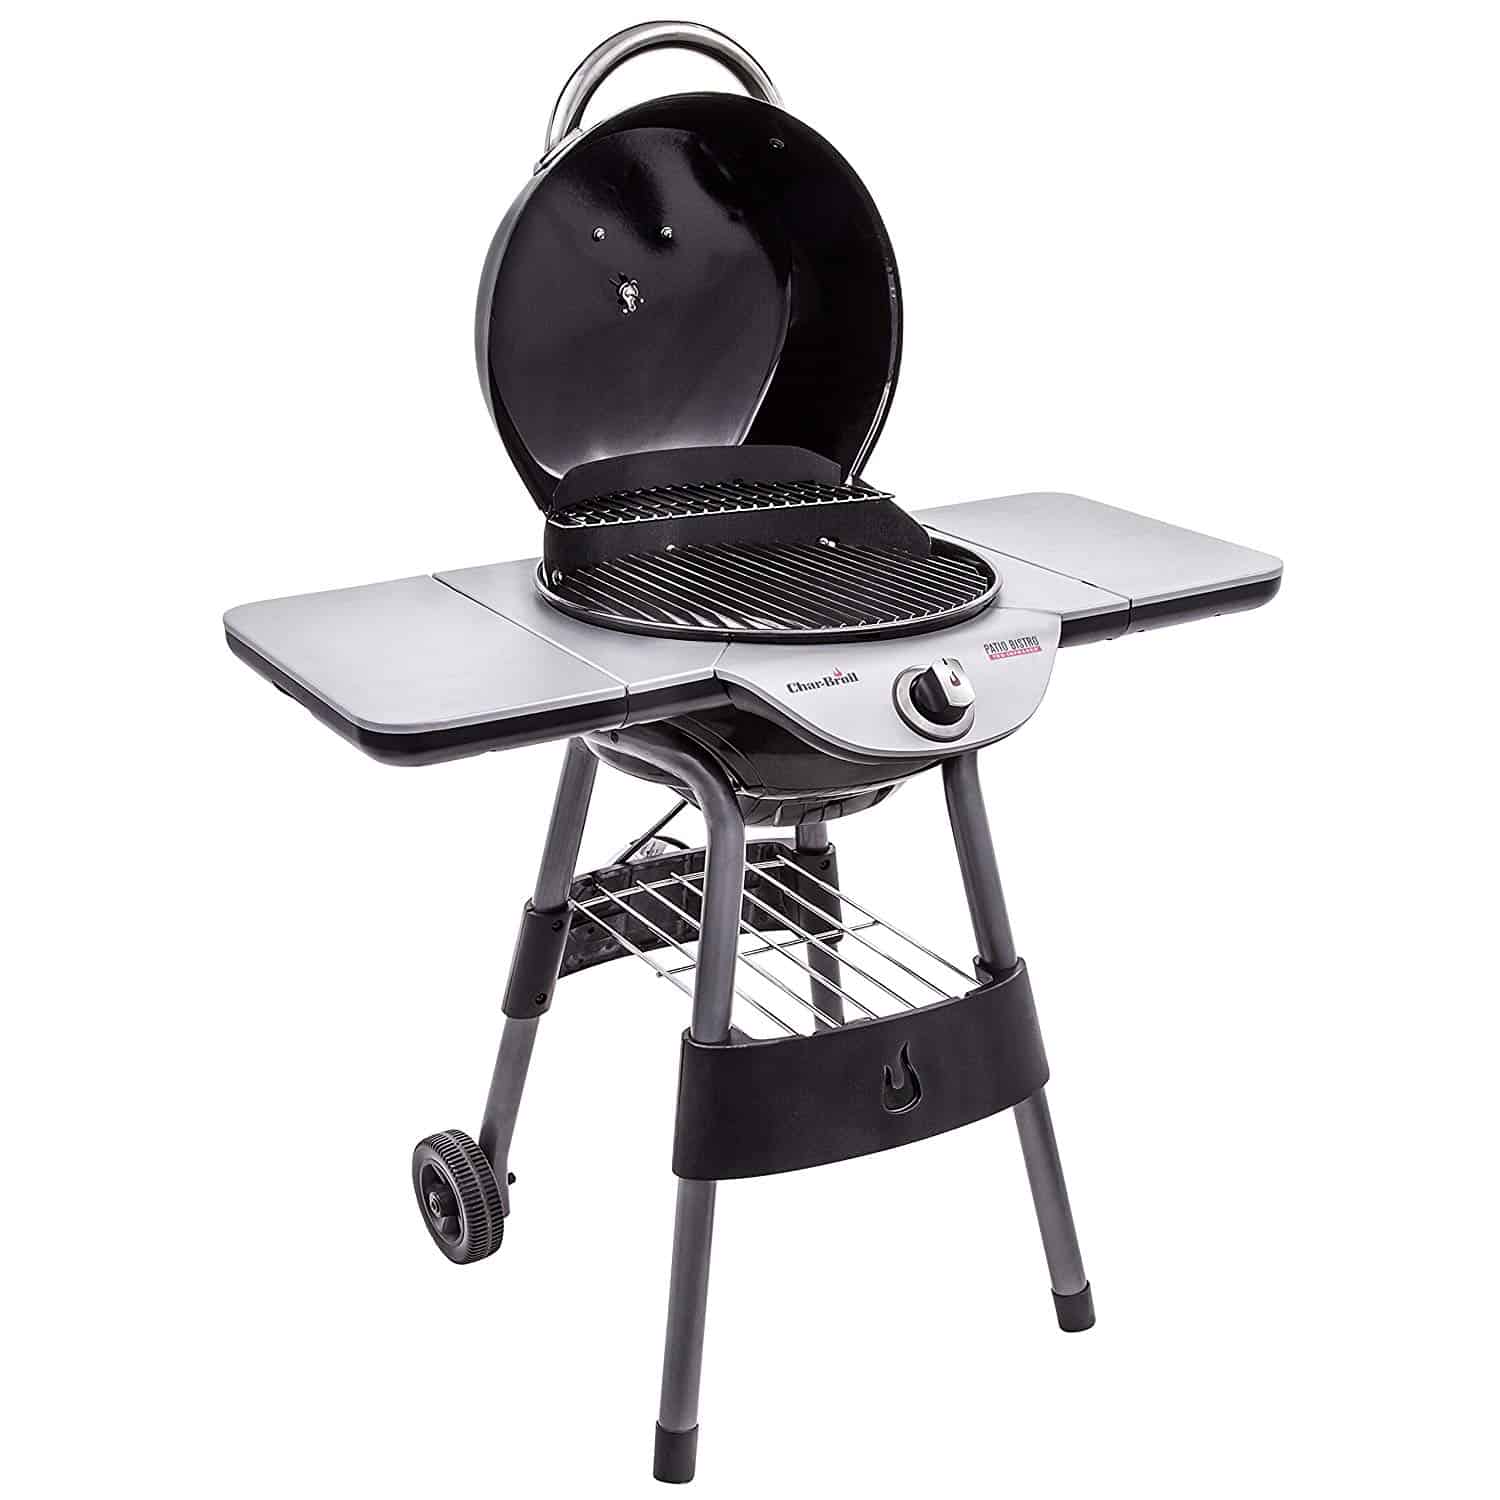 Petite-Cuisson-Grill-Char-Broil-Patio-Bistro-Infrarouge